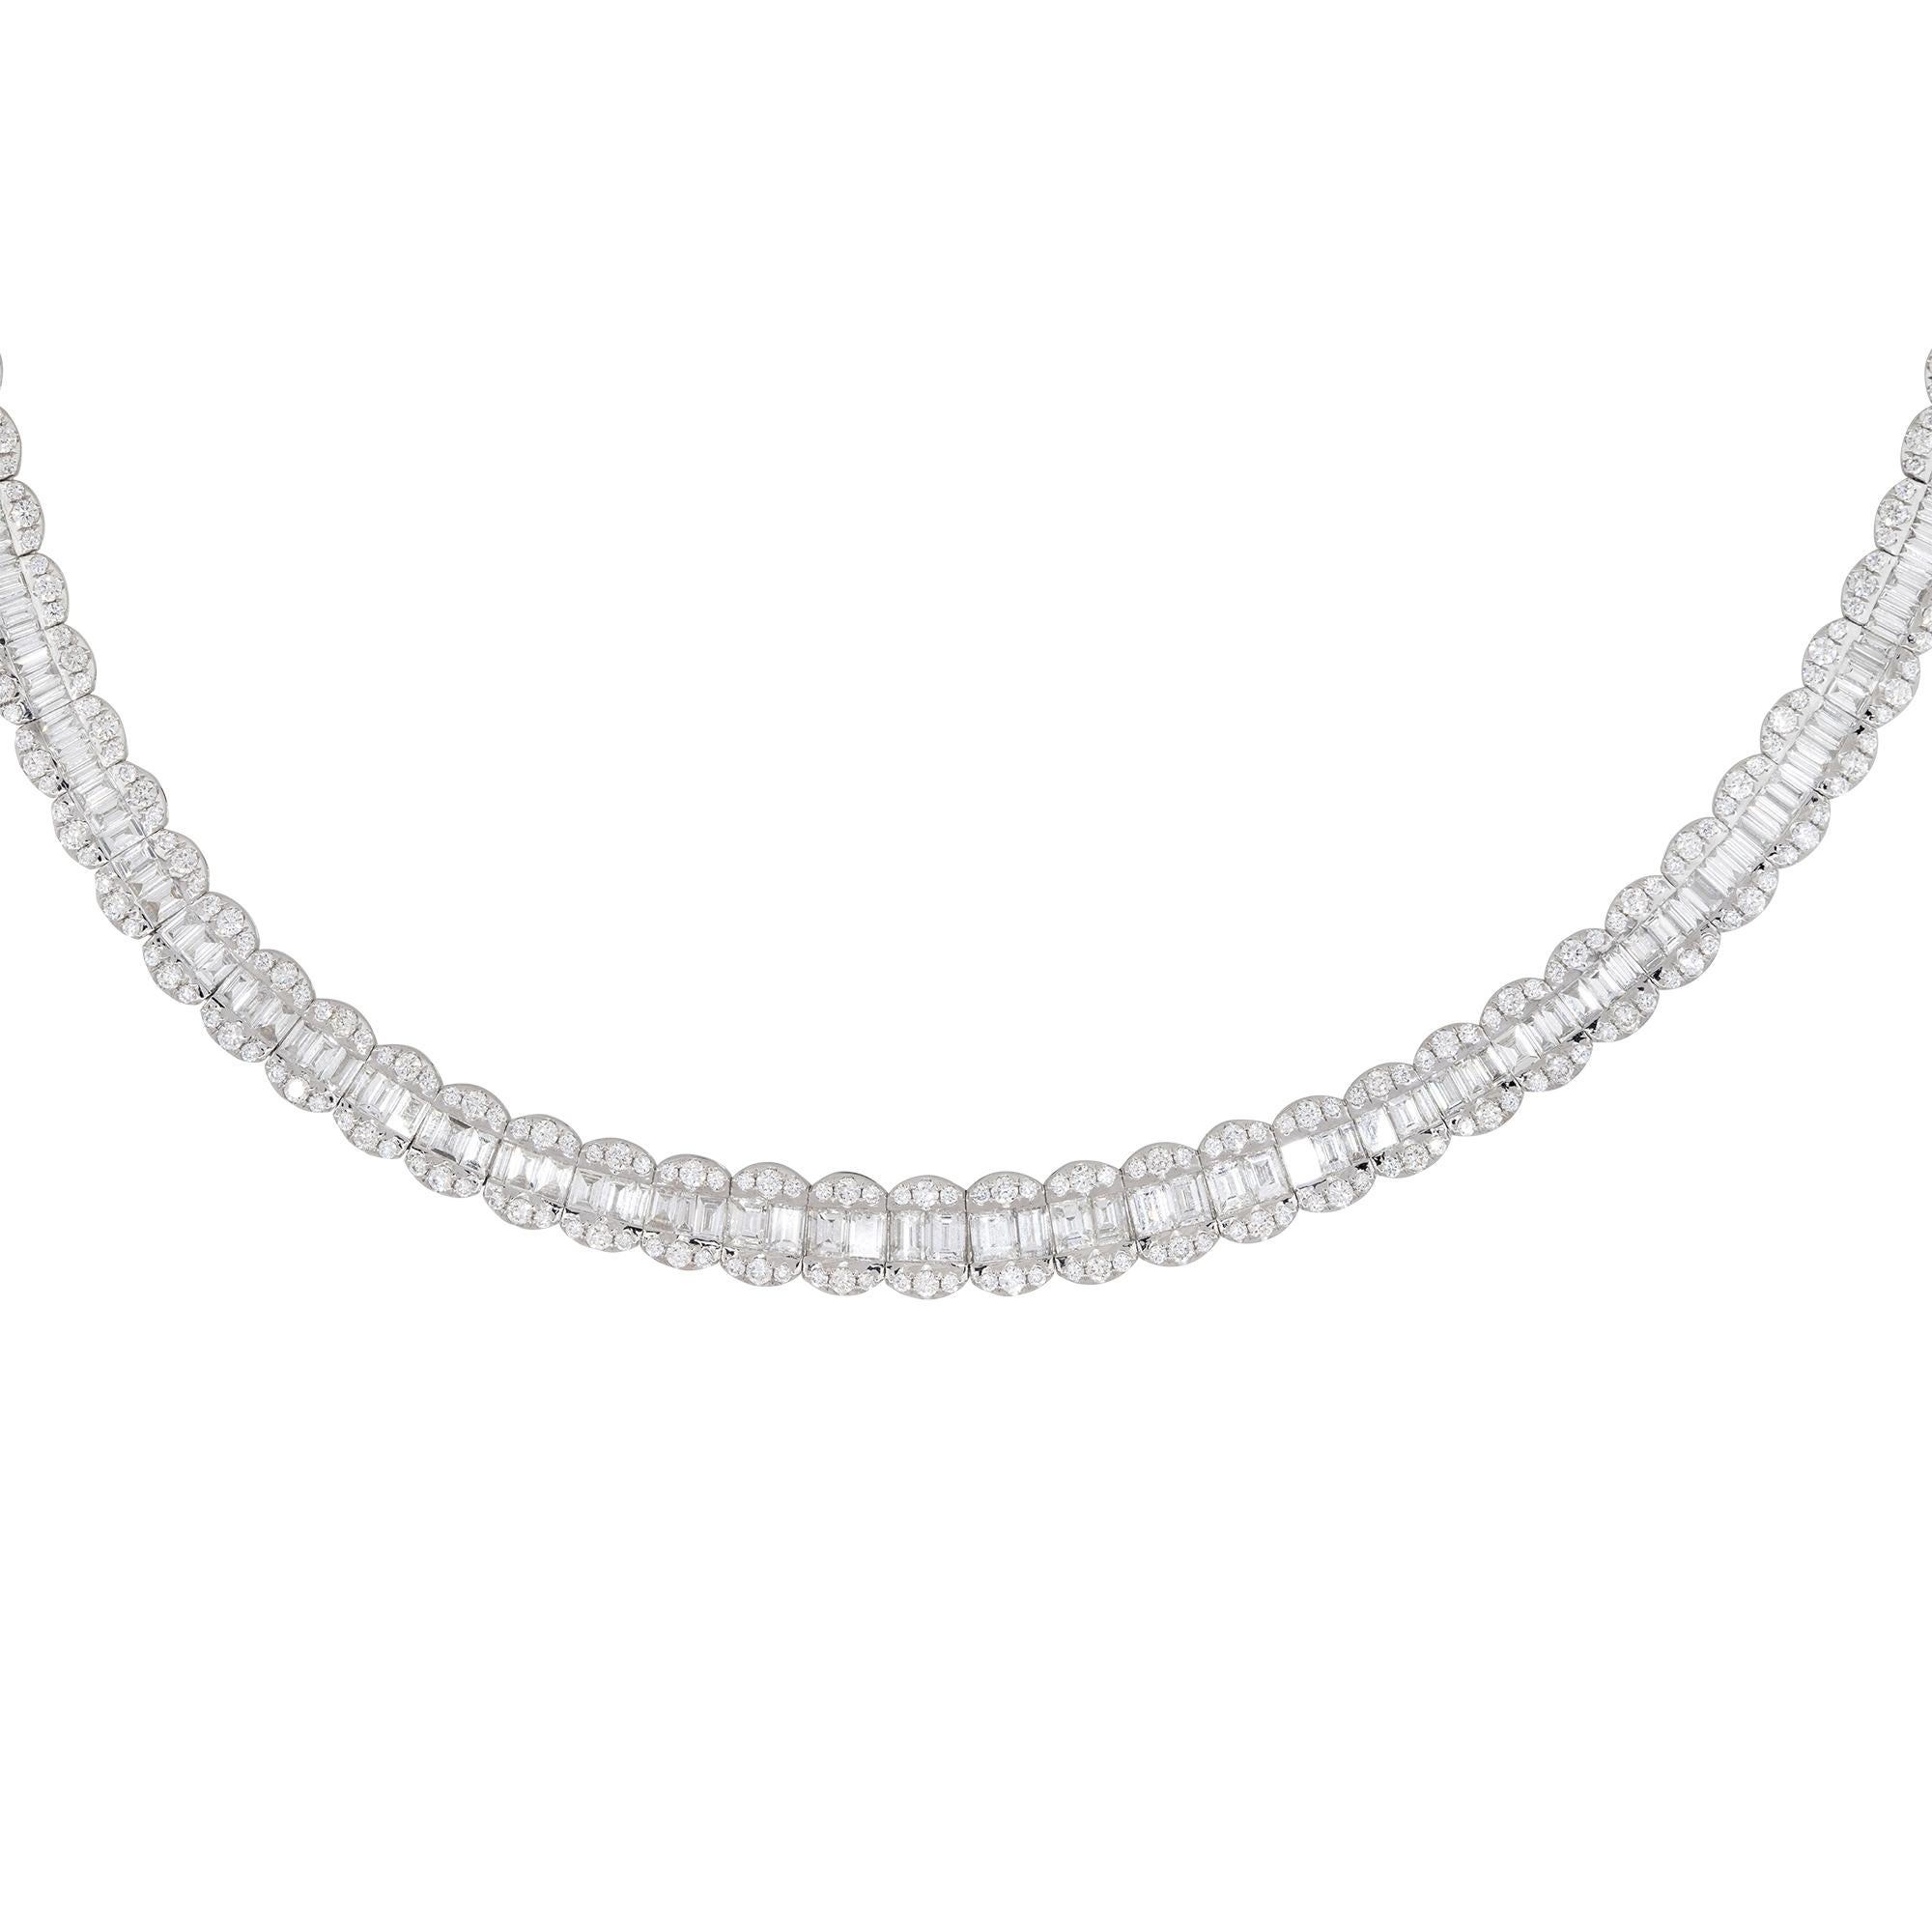 18k White Gold 14.69ctw Baguette & Round Brilliant Cut Diamond Scalloped Tennis Necklace

Product: Baguette & Round Brilliant Diamond Necklace
Material: 18k White Gold
Diamond Details: There are approximately 5.50 carats of Baguette cut diamonds